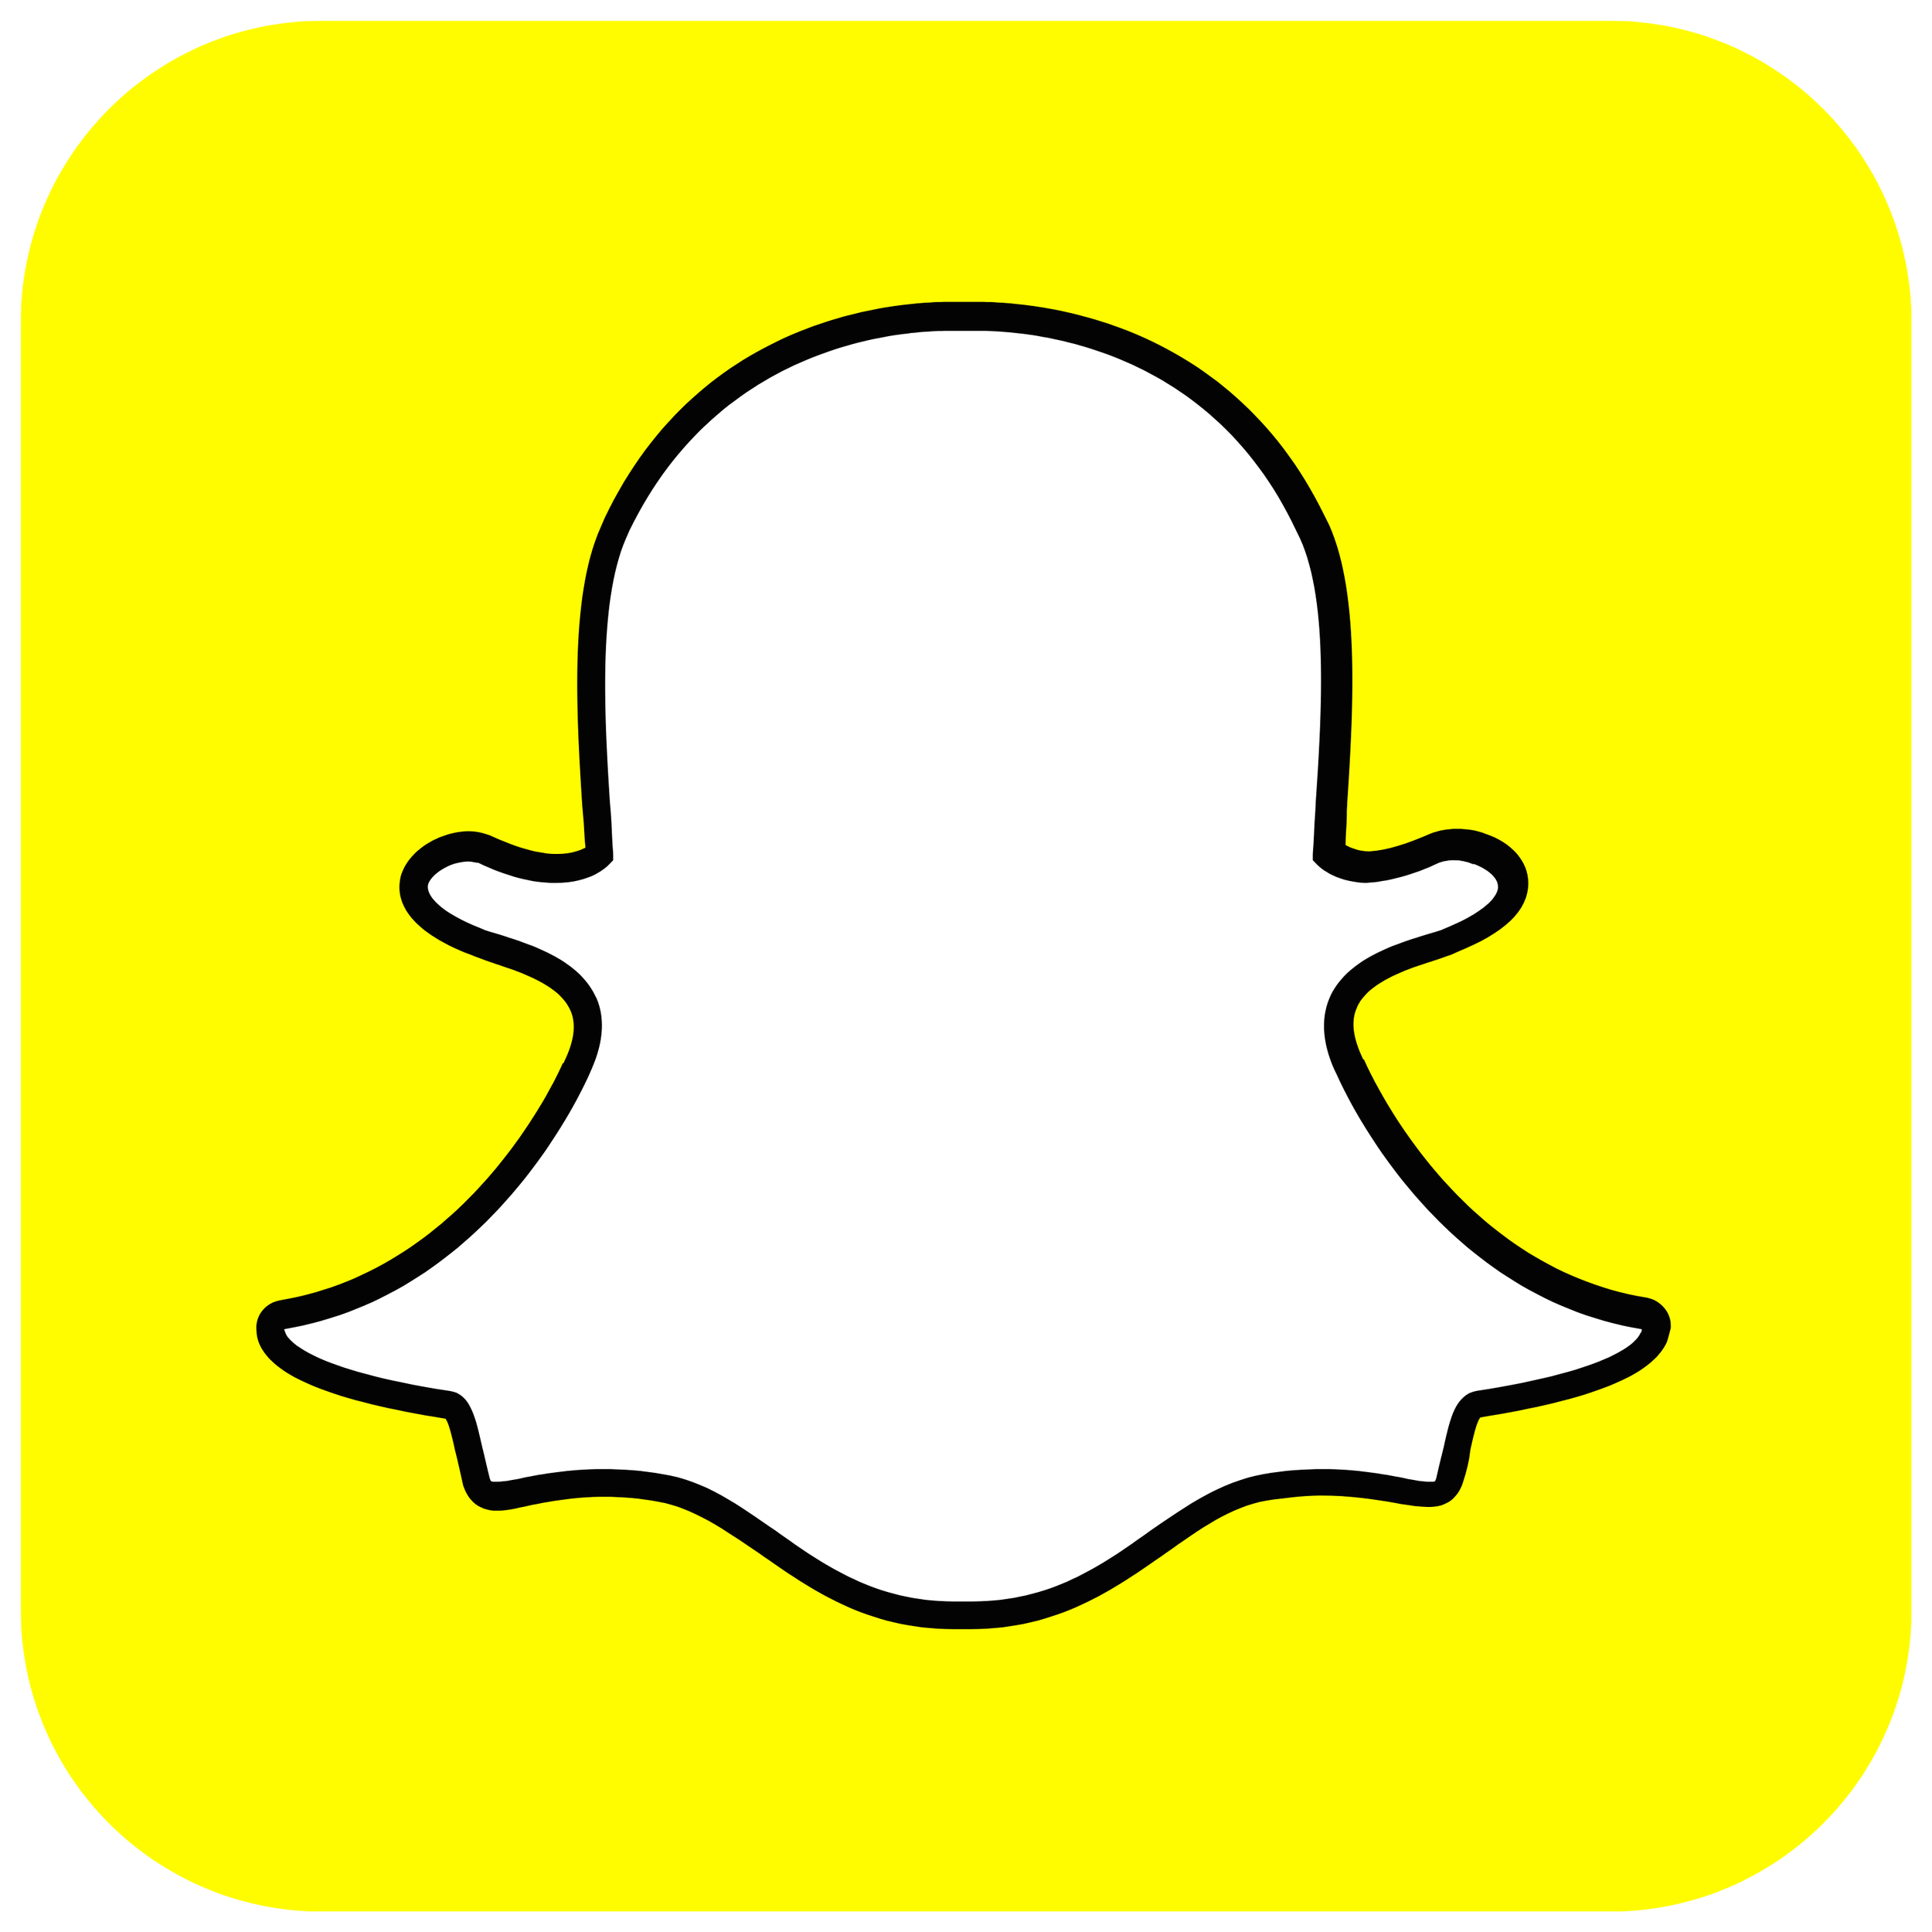 Parents' Ultimate Guide to Snapchat